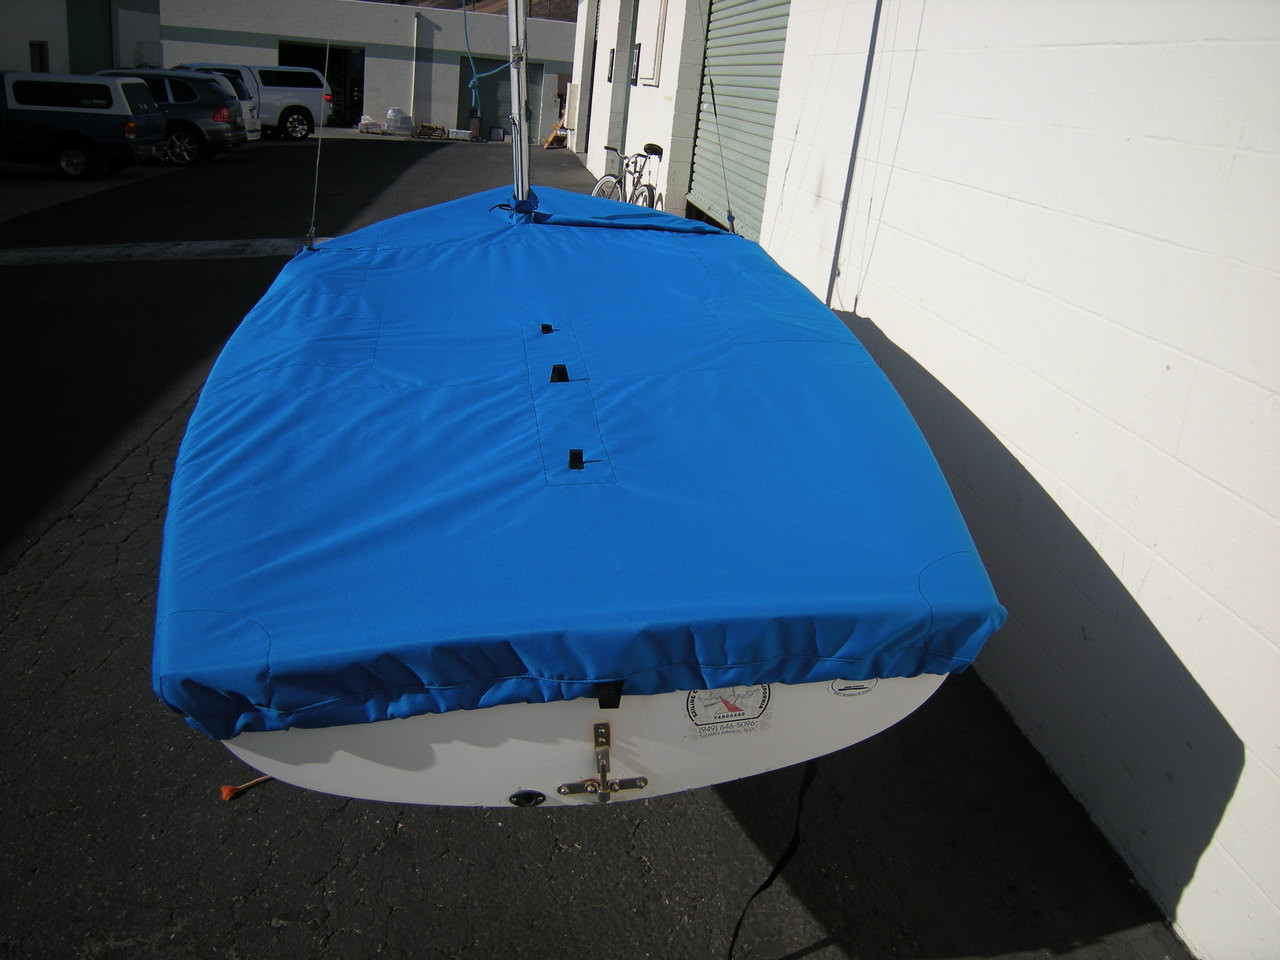 Vanguard 420 Mooring Cover by SLO Sail and Canvas. Reinforcements positioned over blocks and cleats prevent chafing.

